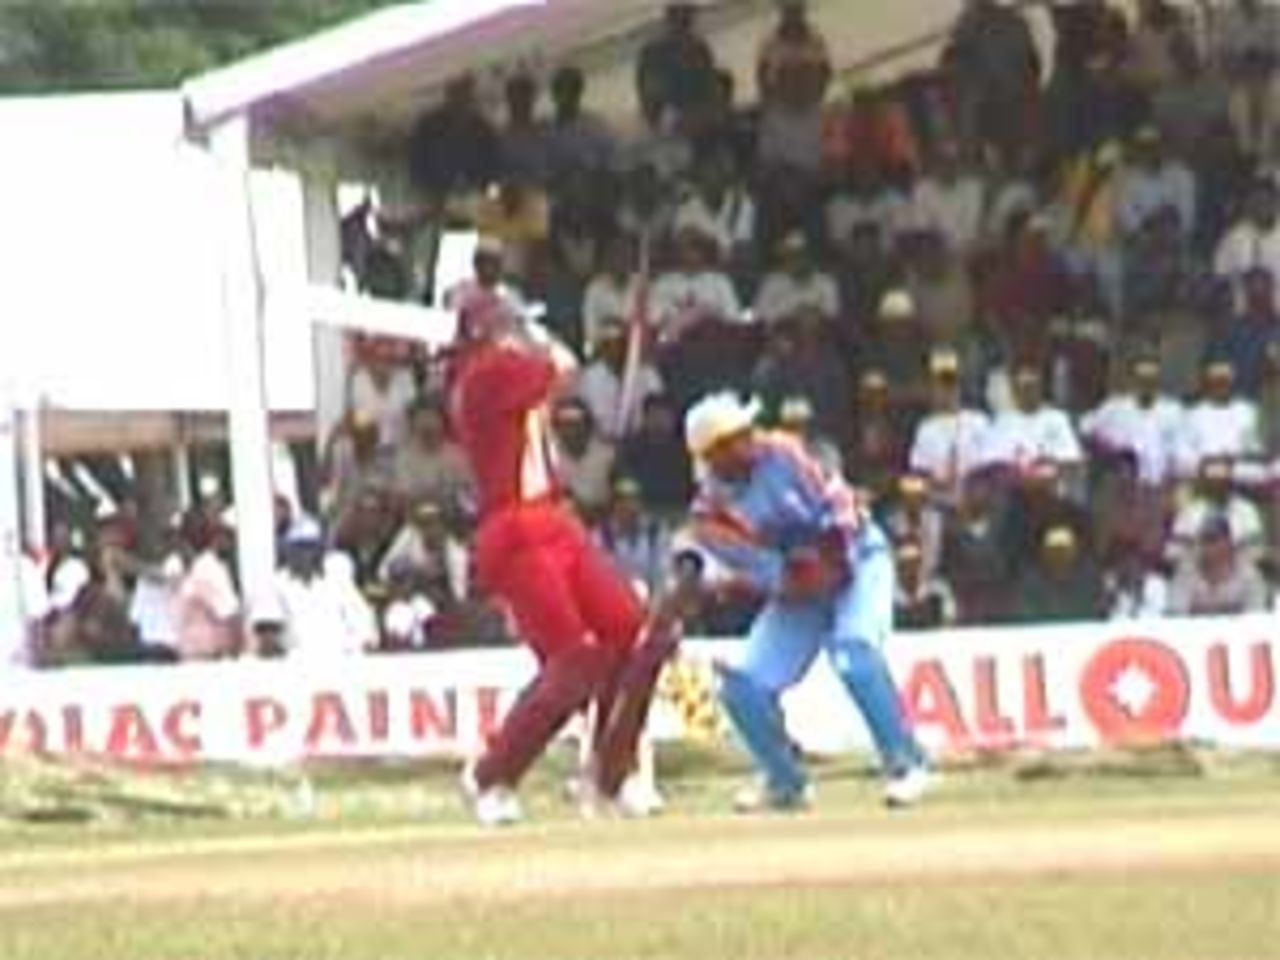 Ricardo Powell sends a ball out of the stadium, India v West Indies (3rd ODI), Coca-Cola Singapore Challenge, 1999-2000, Kallang Ground, Singapore, 5 Sep 1999.